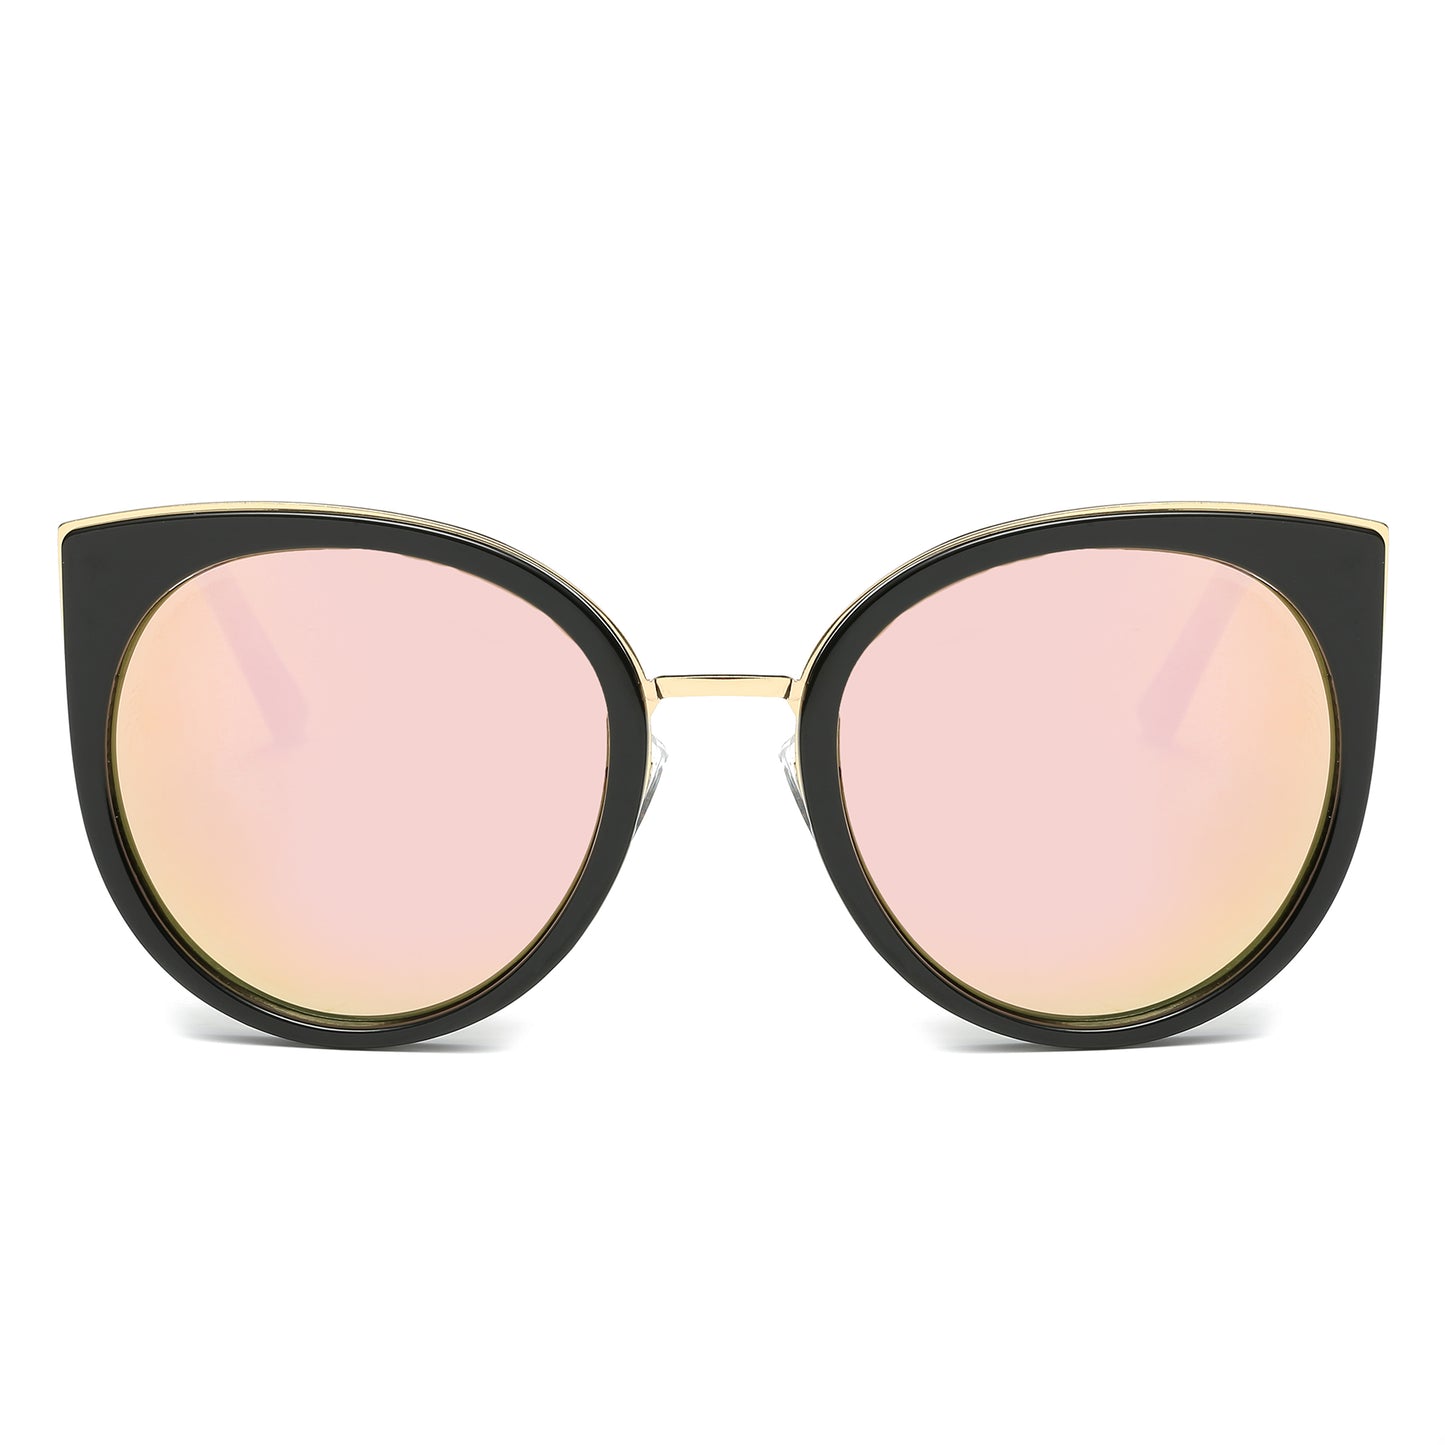 PALISADES SUNGLASS IN BLACK WITH PINK